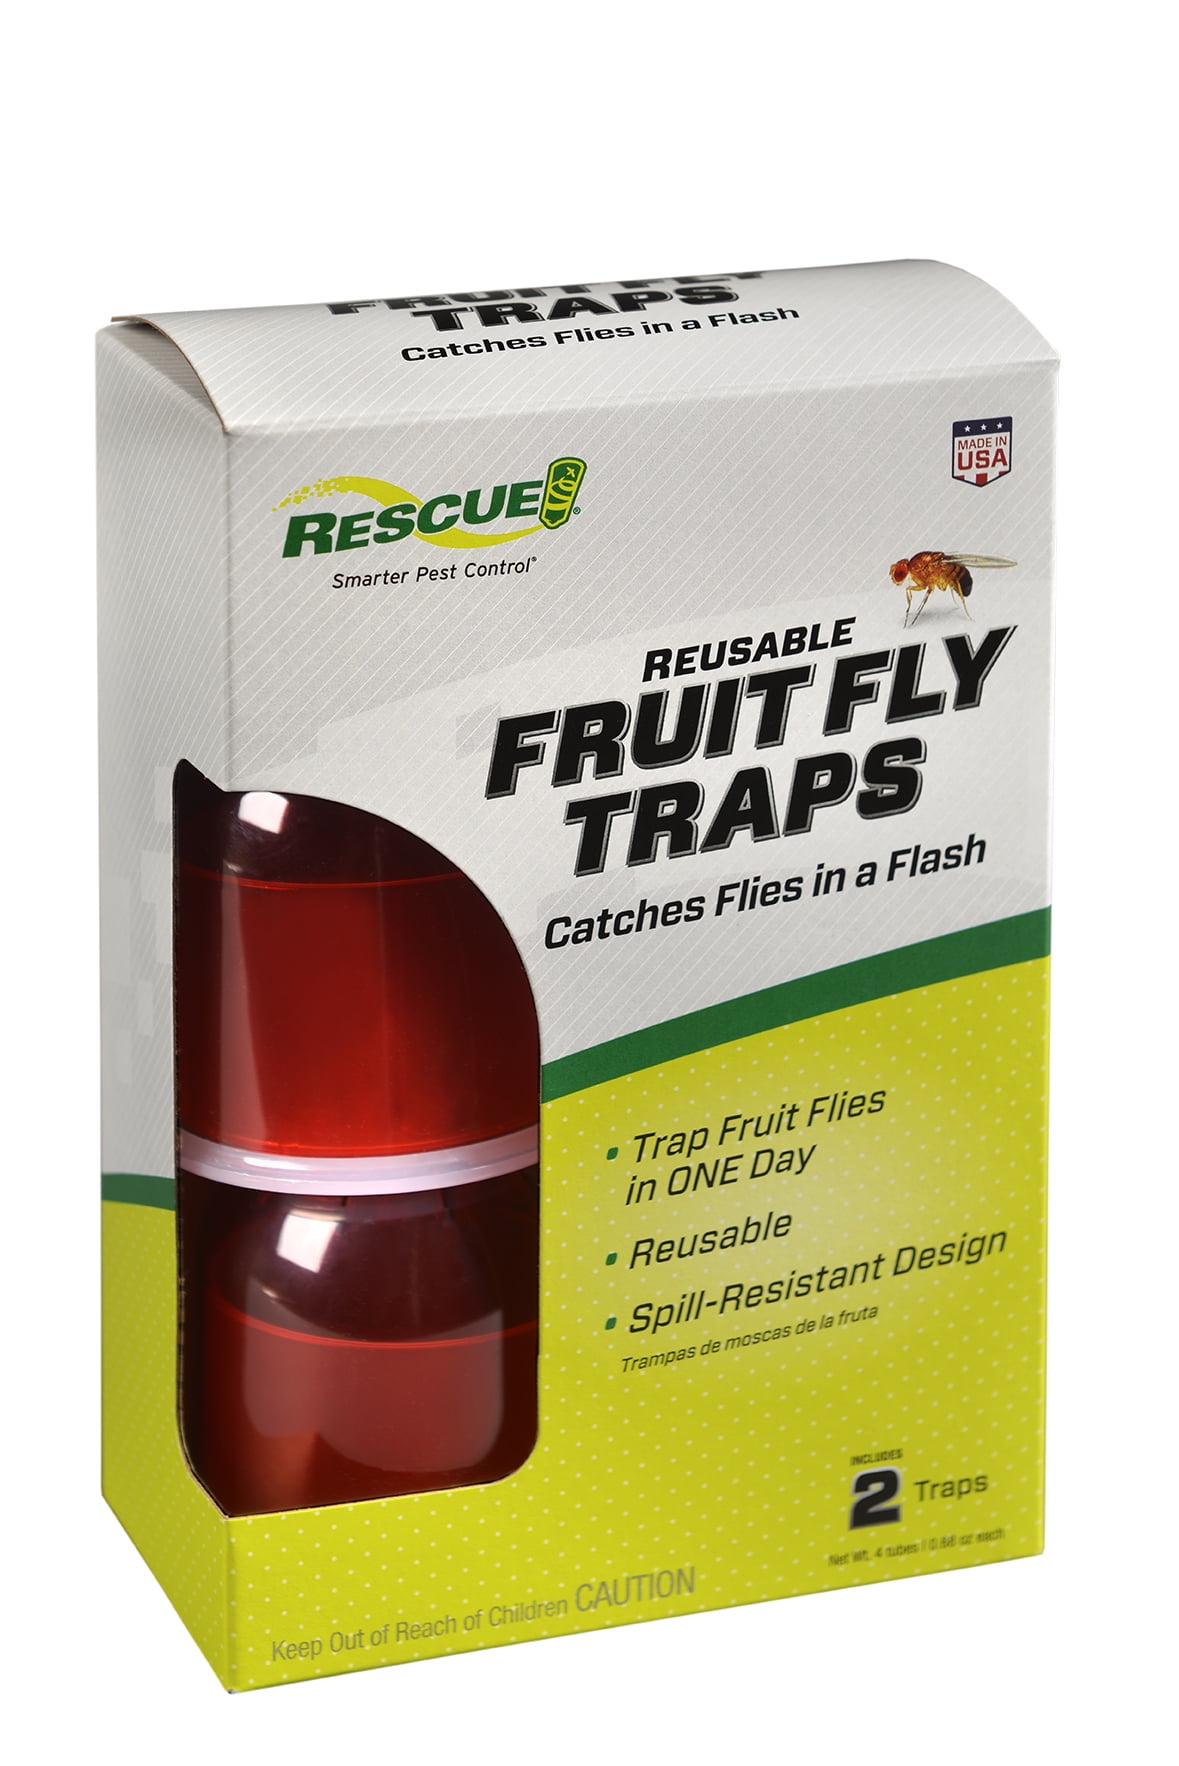 Make your own Terro Fruit Fly Trap Solution 